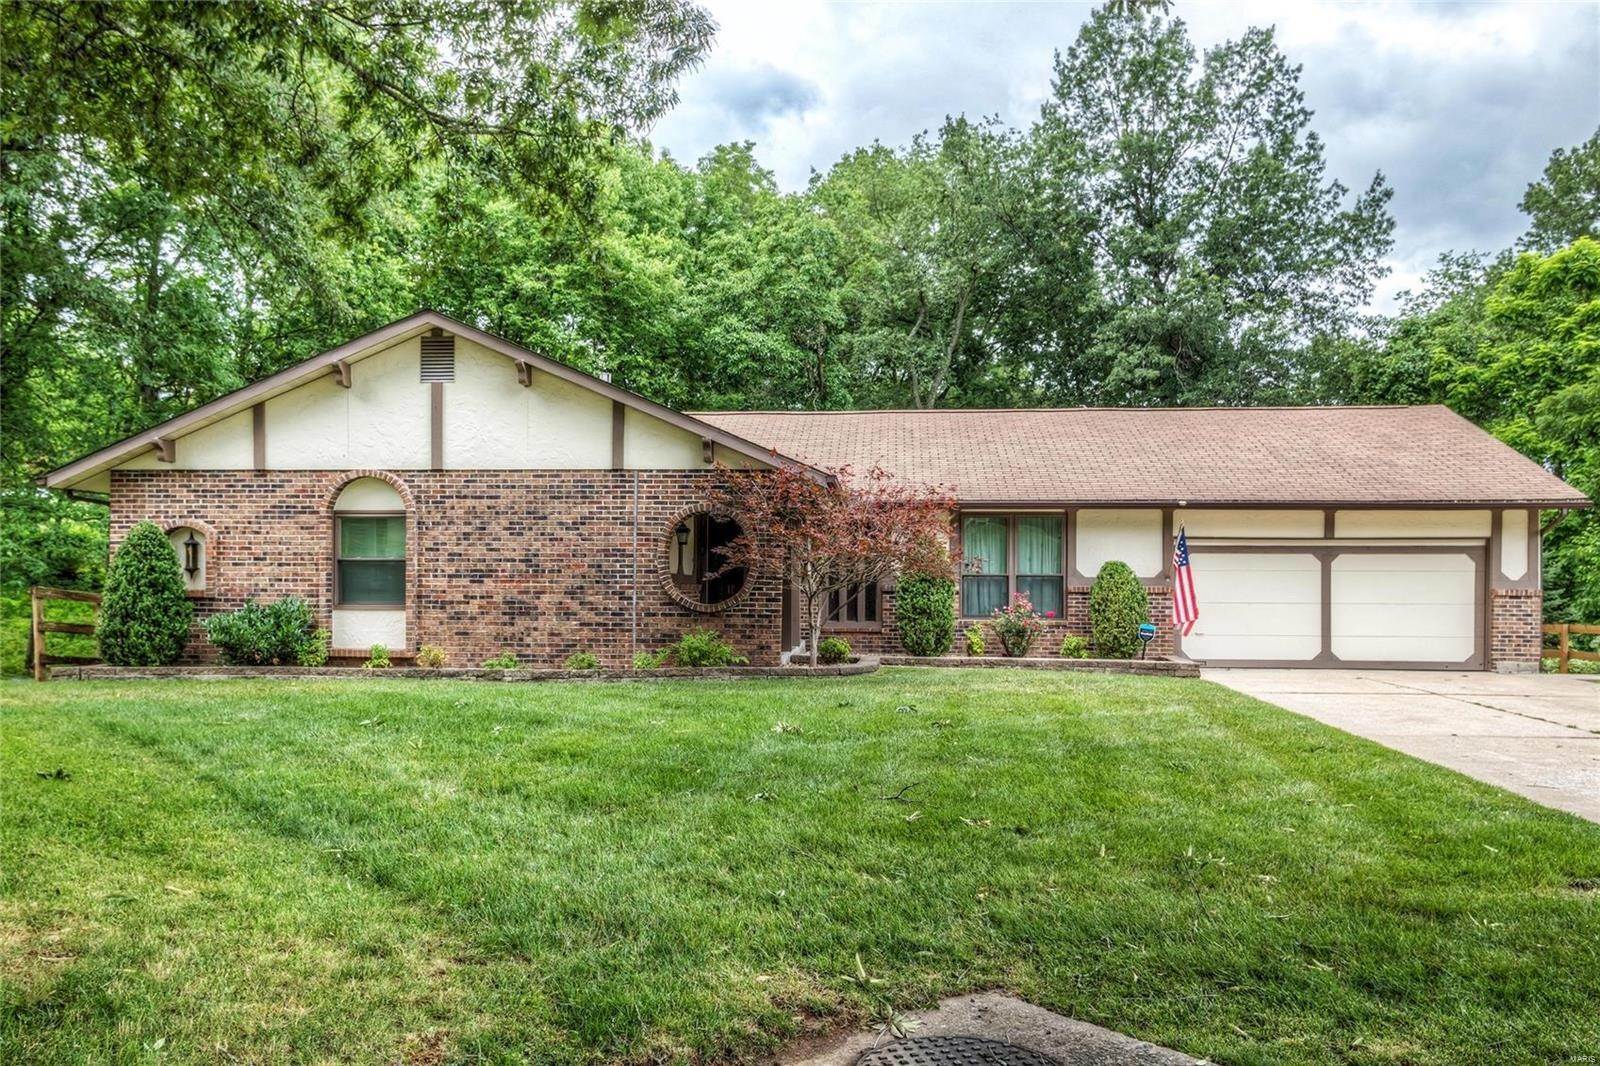 Property for Sale at 1301 Woodstone Drive St. Charles, Missouri 63304 United States